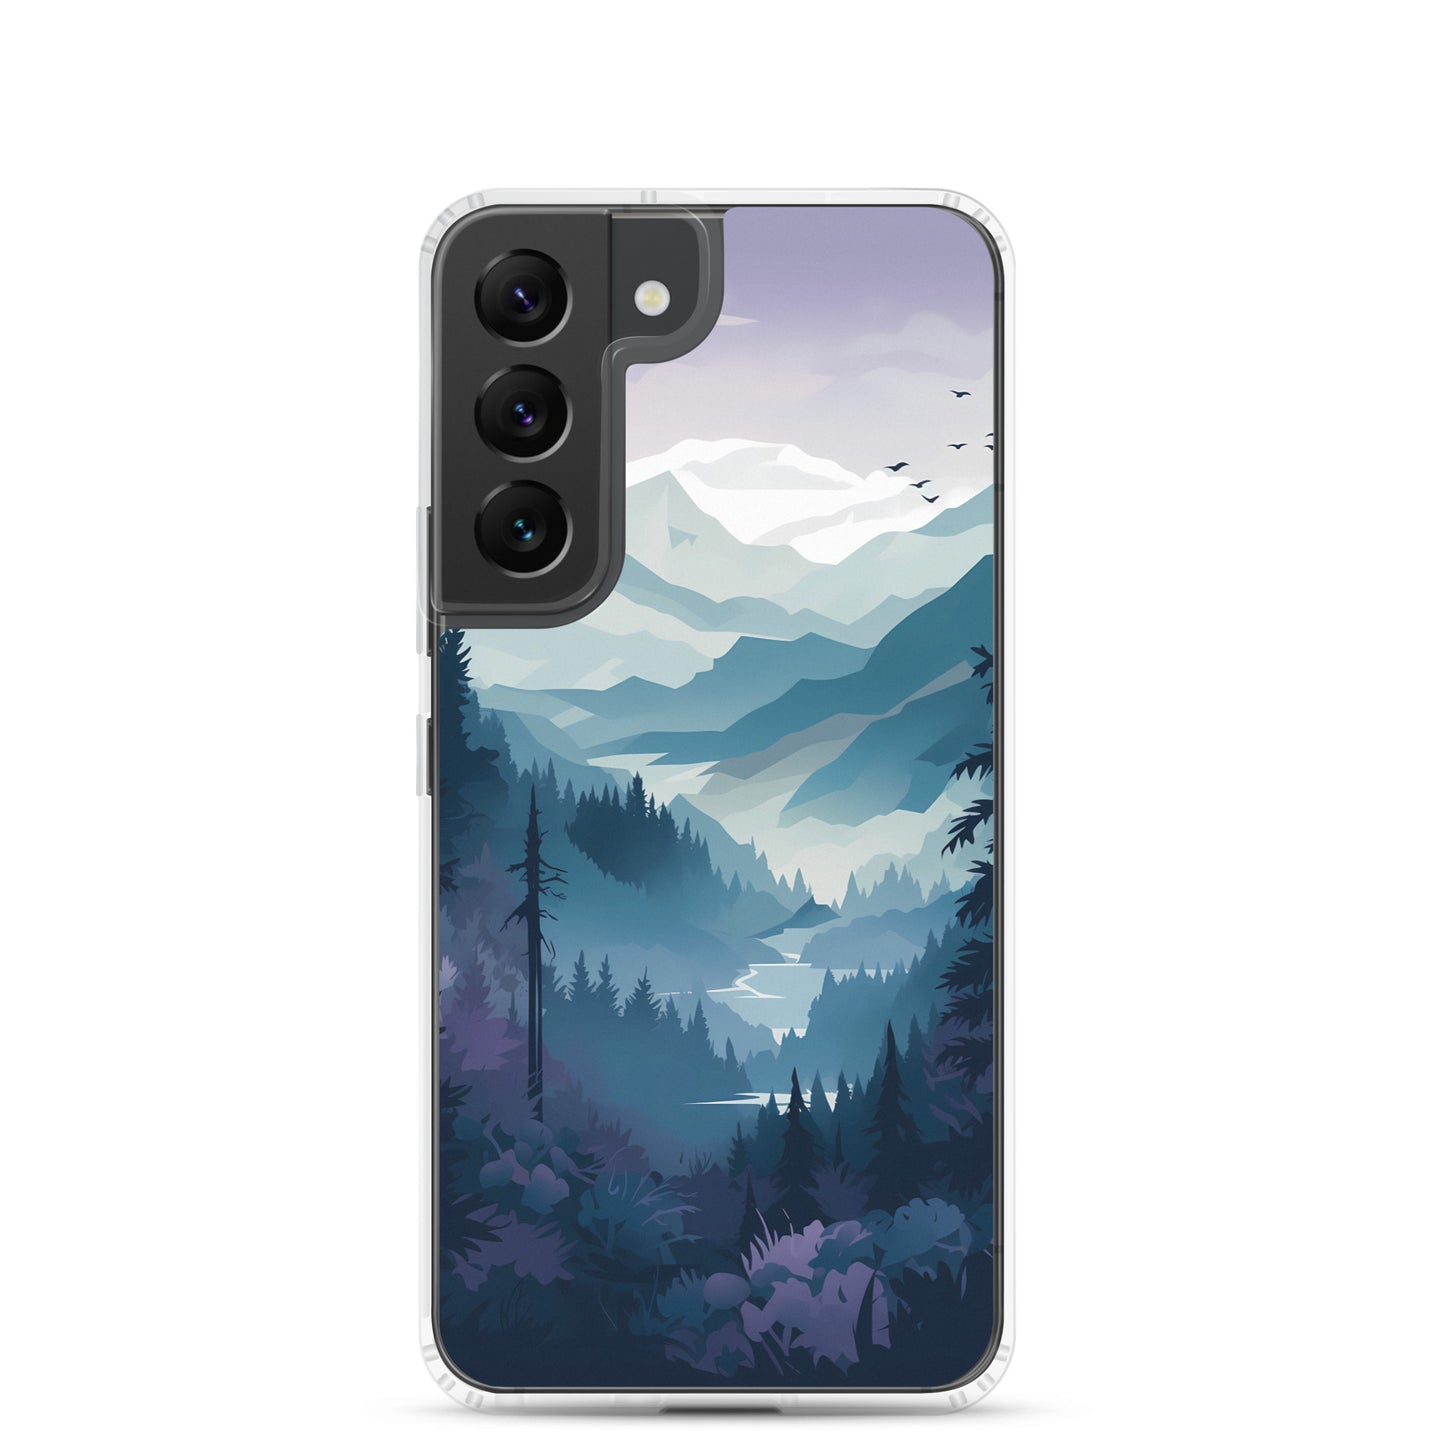 Samsung Phone Case - National Parks - Misty Mountains